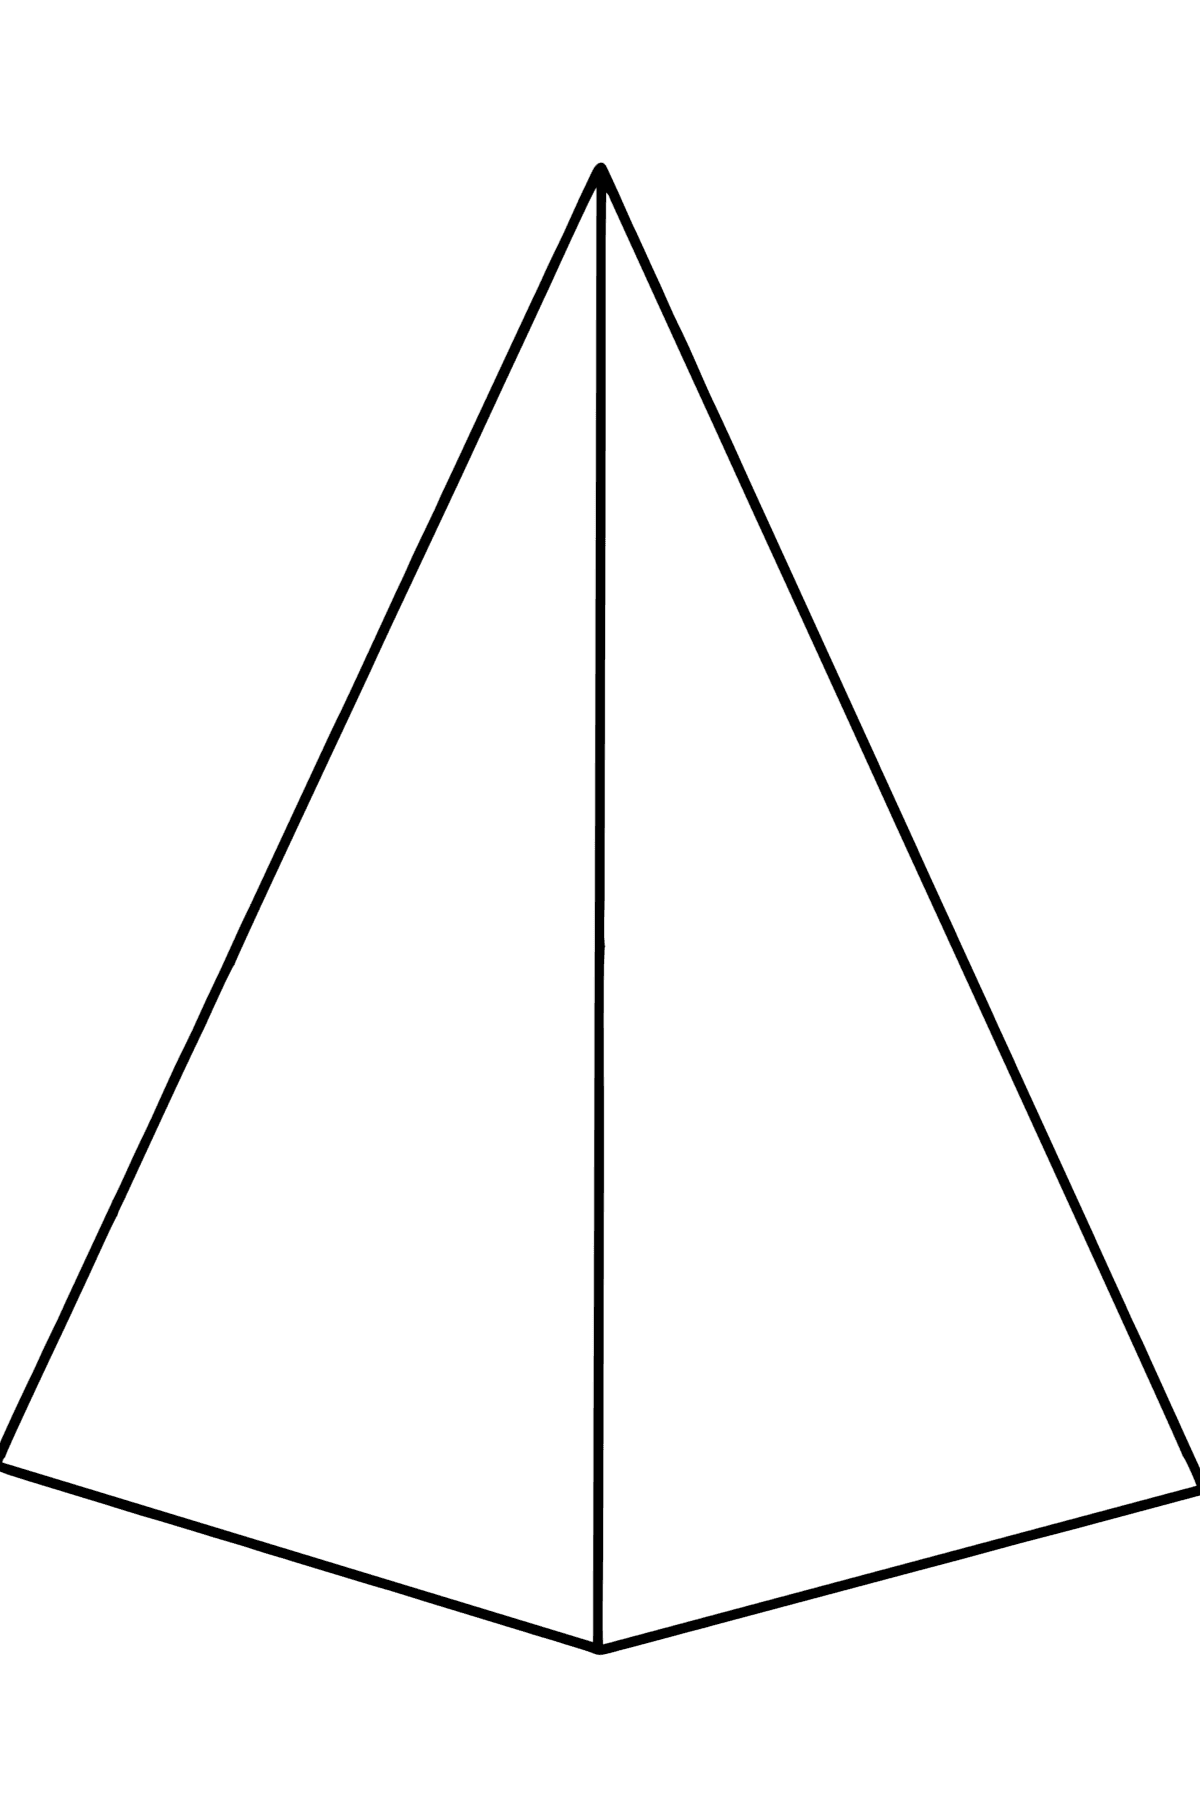 Pyramid coloring page - Coloring Pages for Kids